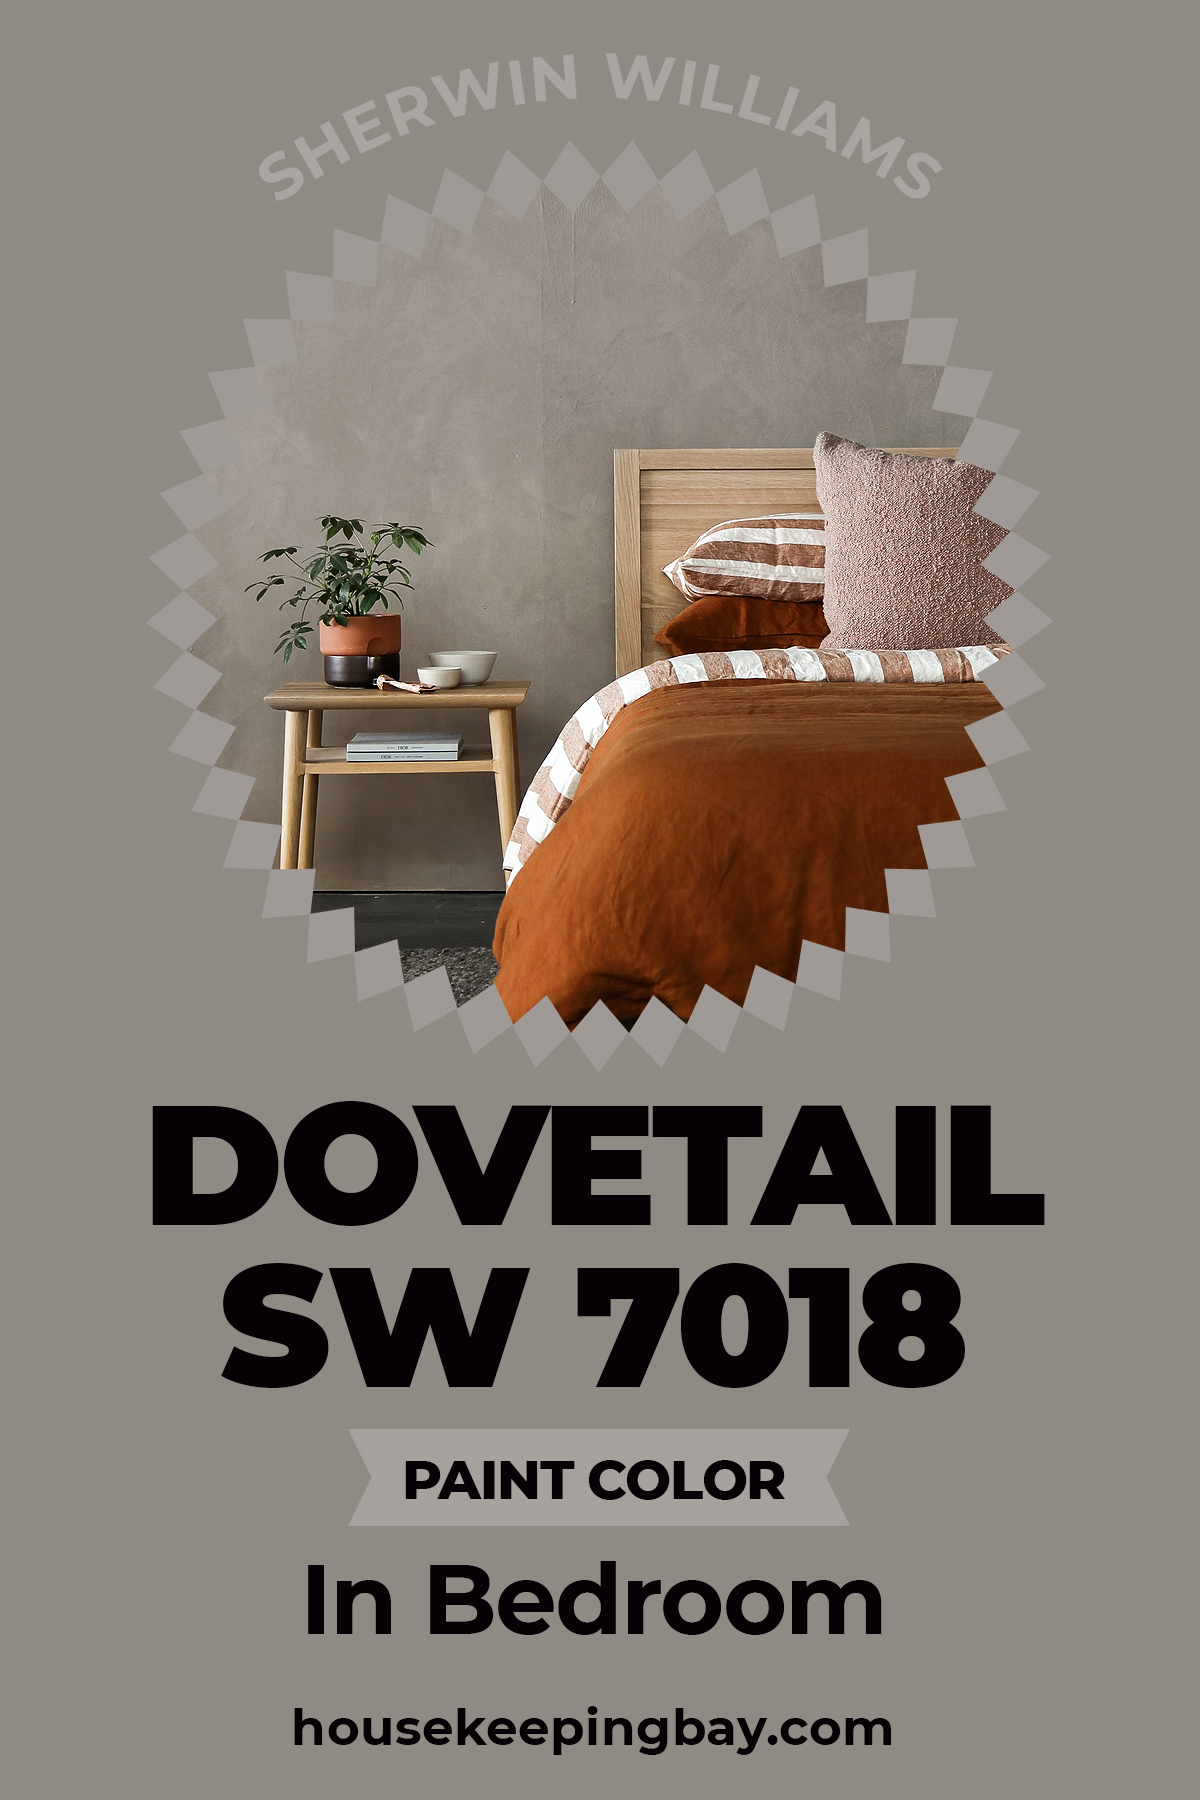 Sherwin Williams Dovetail Paint Color in bedroom